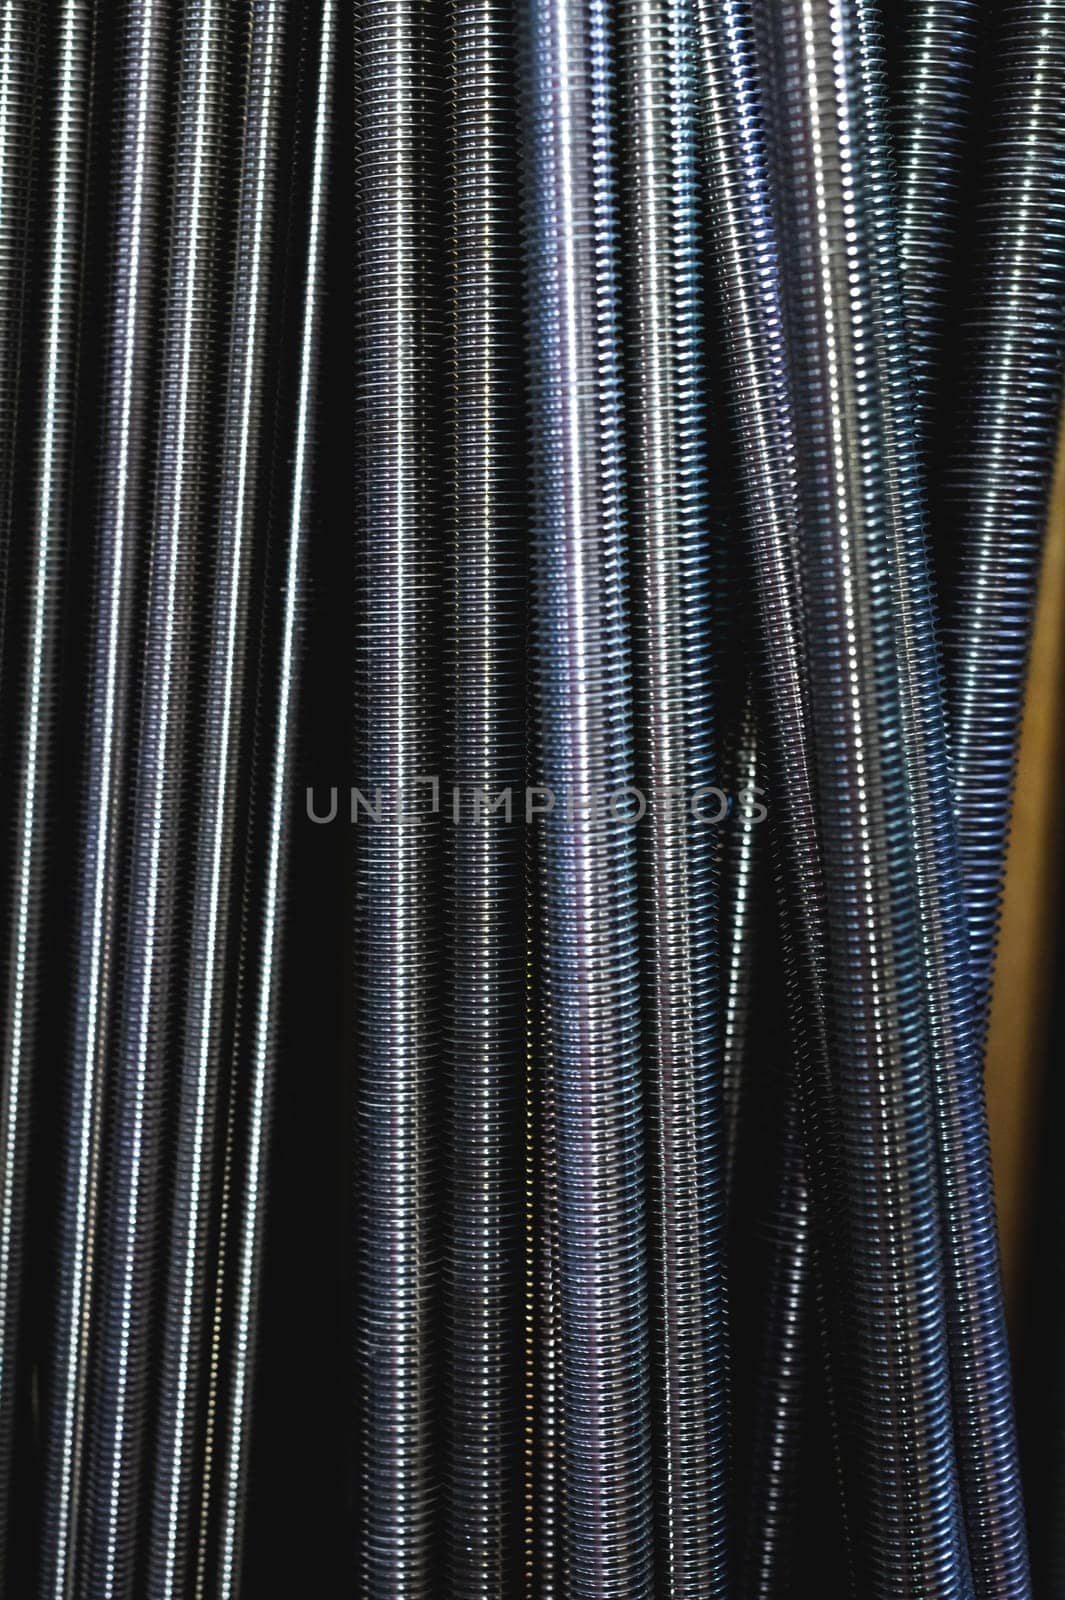 Threaded rods are also called studs. Galvanized threads run along the entire length of the rod. They are used with a metal spacer when suspended from the ceiling. Inventory in an industrial warehouse.